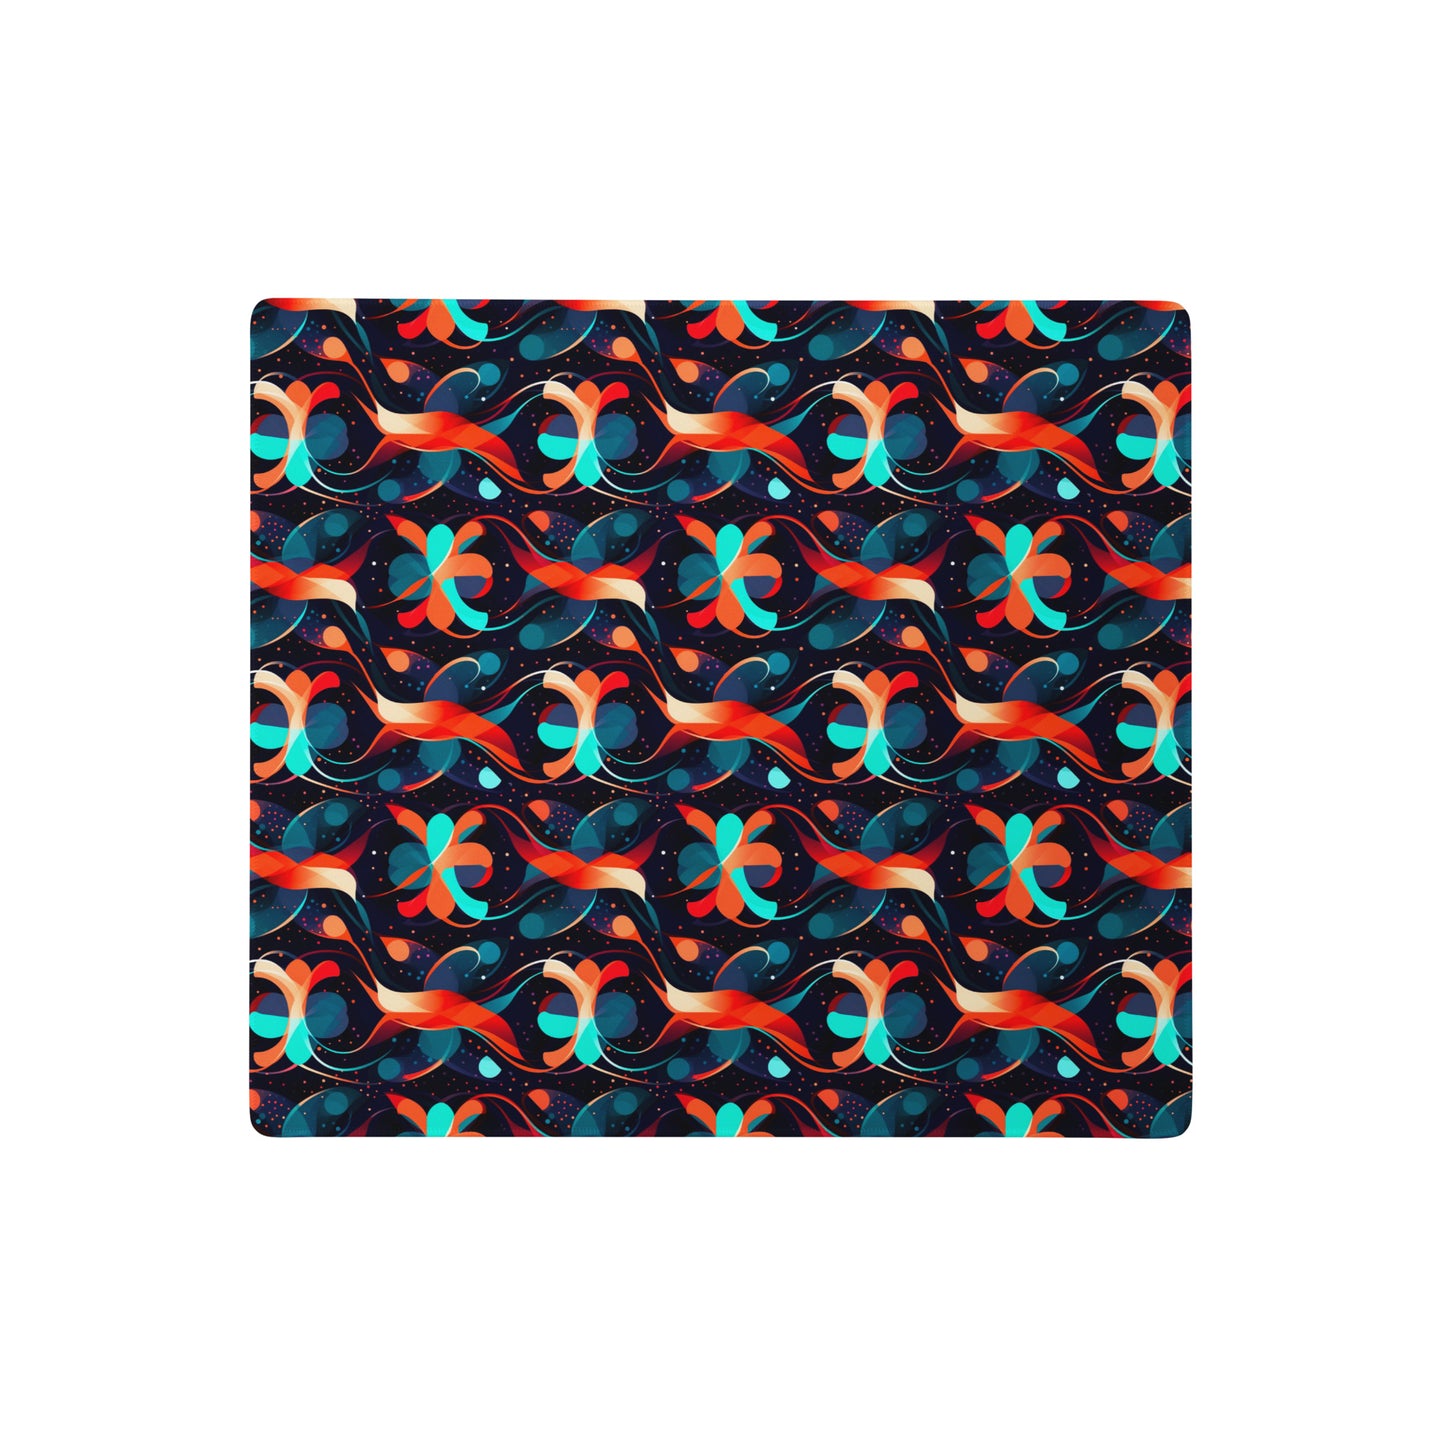 A 18" x 16" desk pad with a wavy orange and blue pattern.